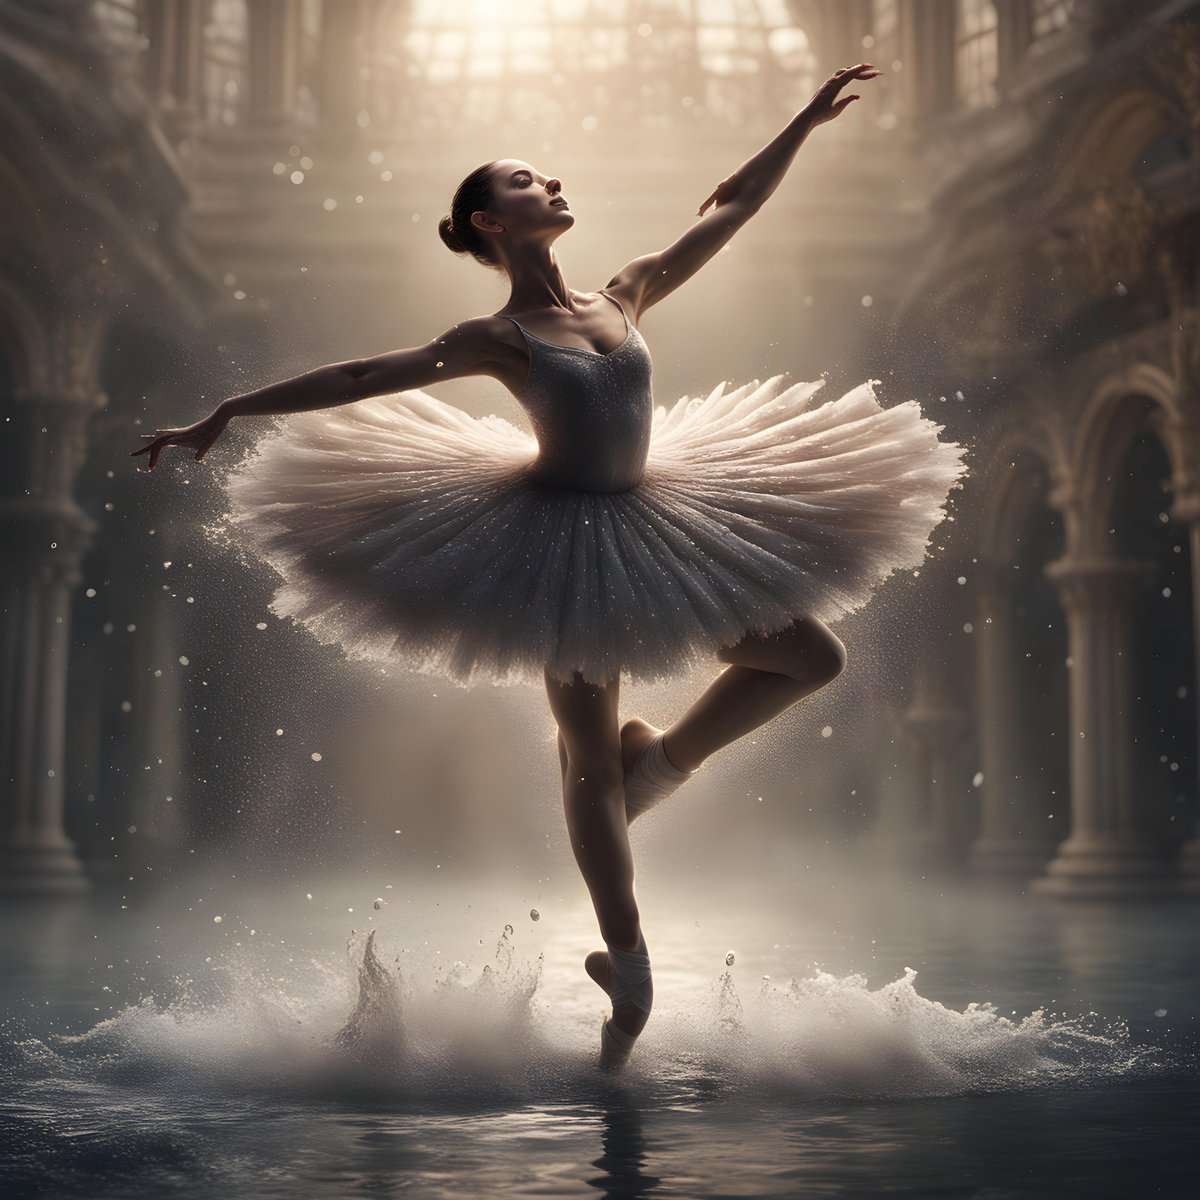 Ballet and Water #ballet #ballerina #PerformanceArt #PerformanceDance #water #tutu #balletshoes #sdxl #stablediffusion #GenerativeAI #aiart #aigenerated #digitalart #artificialintelligence #aiartcommunity #aiartworks #art #artworks #MachineLearning